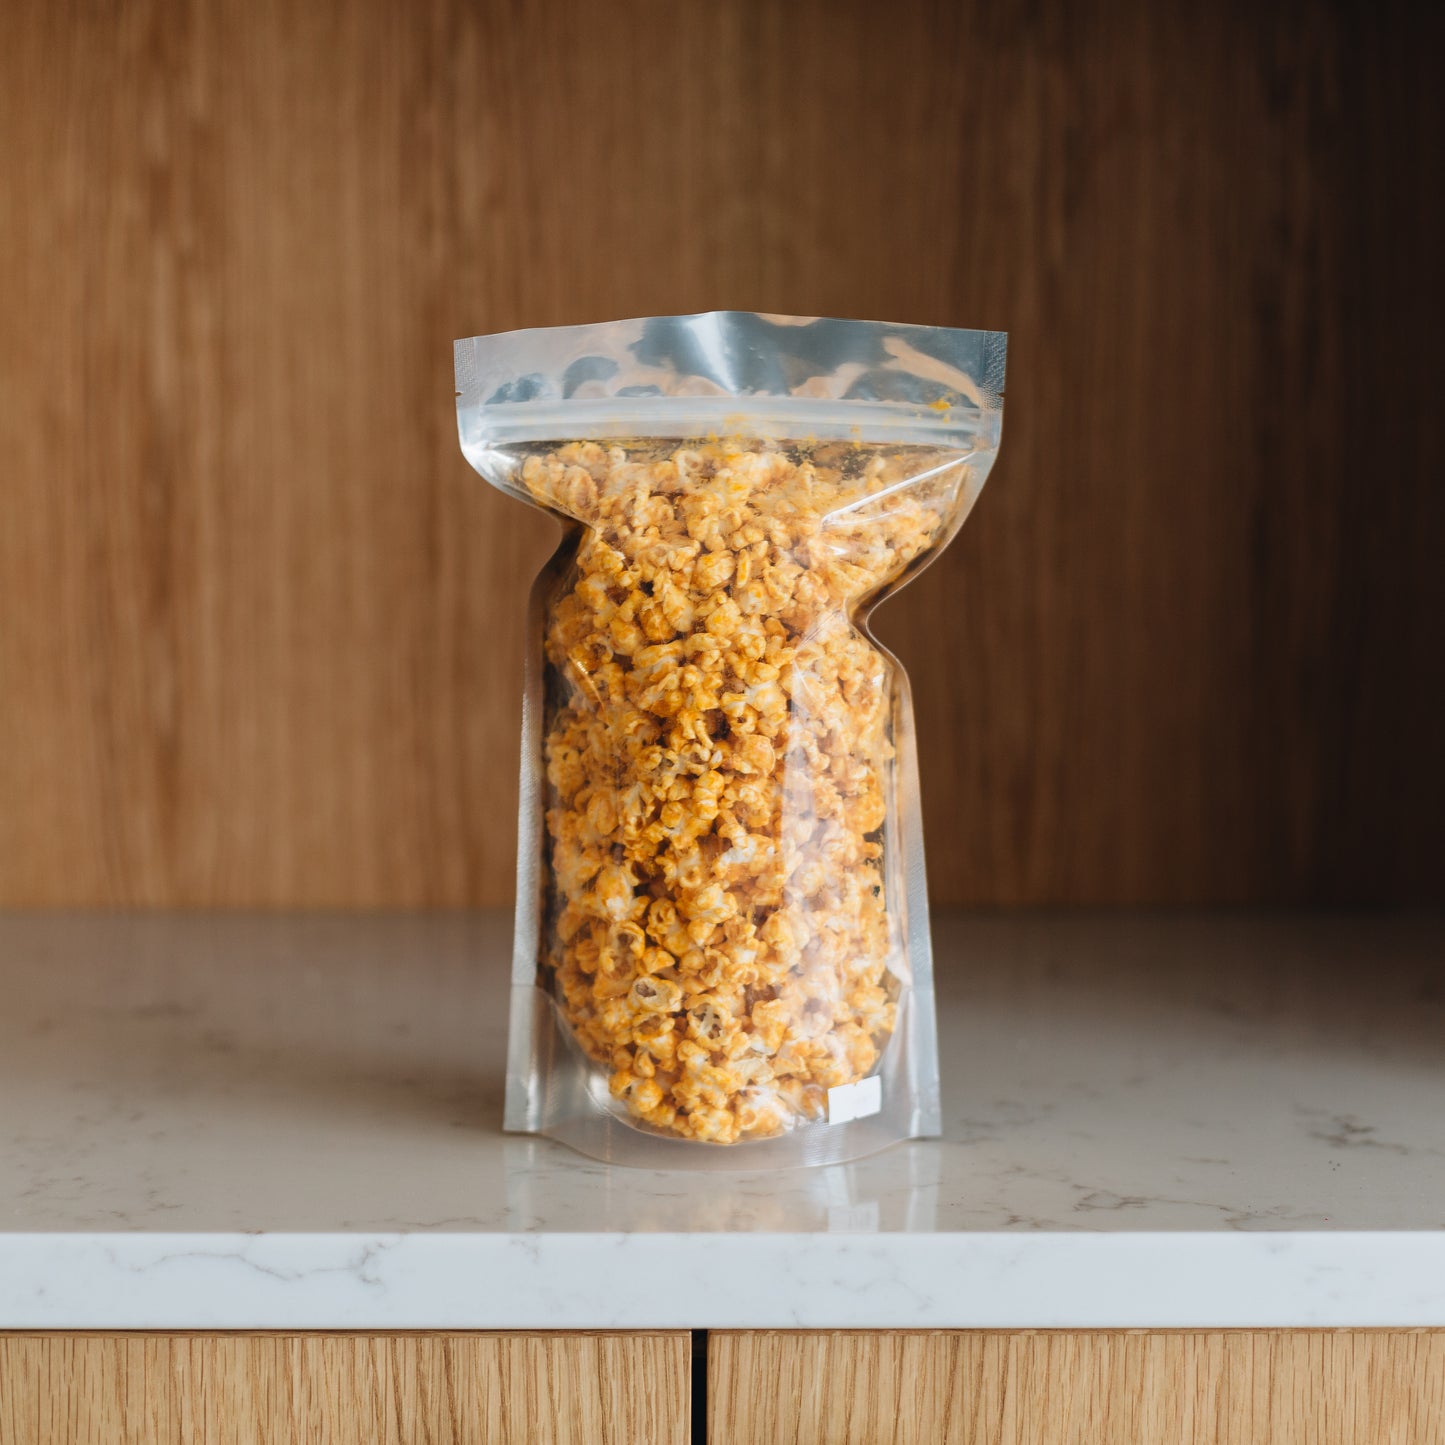 Spice it up with our Jalapeno Cheddar popcorn! This popcorn is the owners favorite and is hard to put down. With a creamy cheese and a backend kick of spice will leave you coming back for more. Order online now or stop in Popnotch Goods to enjoy this spicy treat! Featured is our Large Bag (3.5oz)